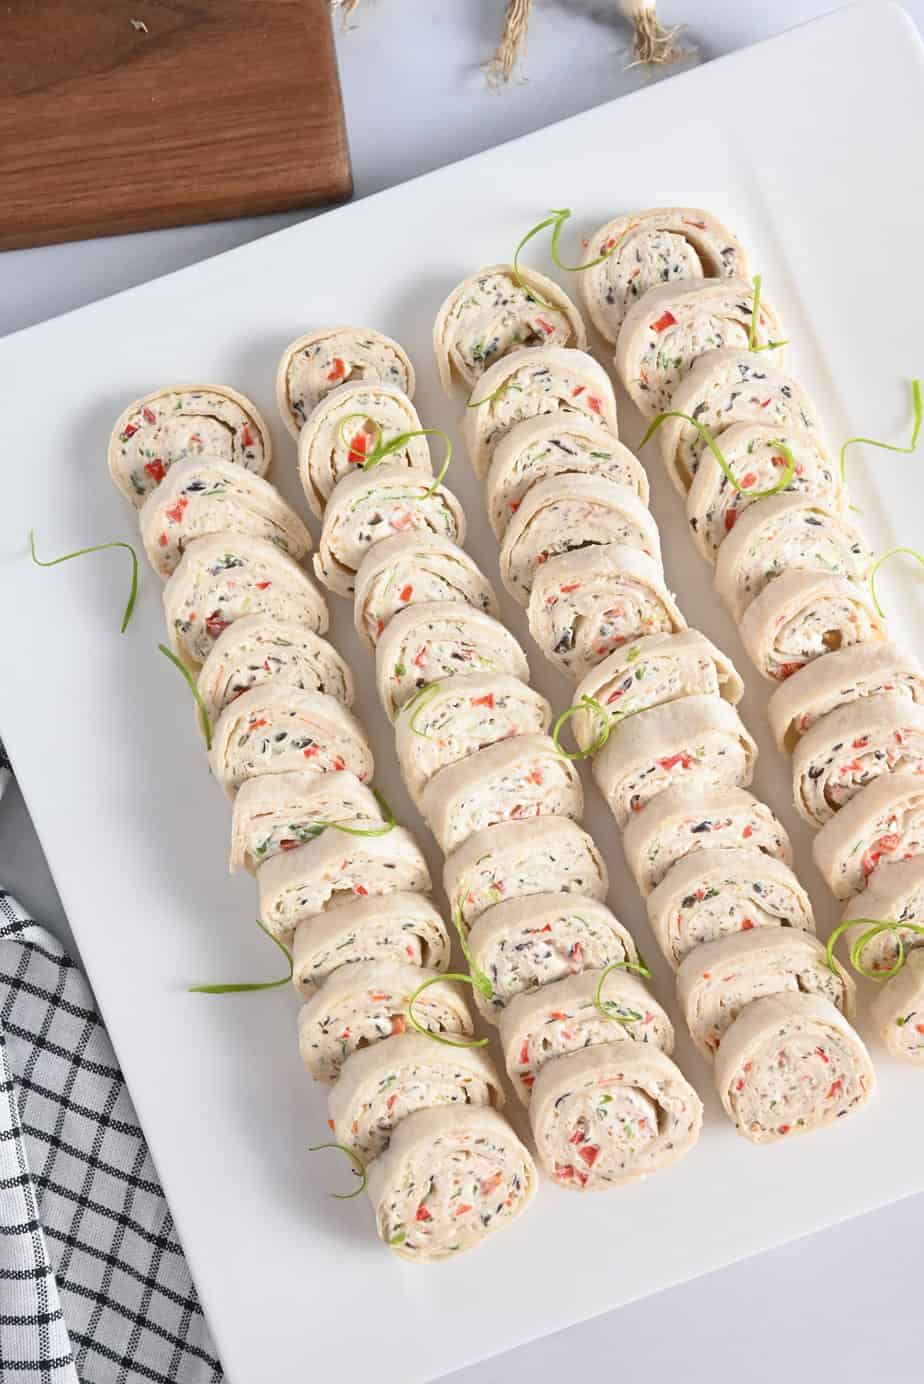 Cream cheese roll ups arranged on a white platter, set on a marble countertop.